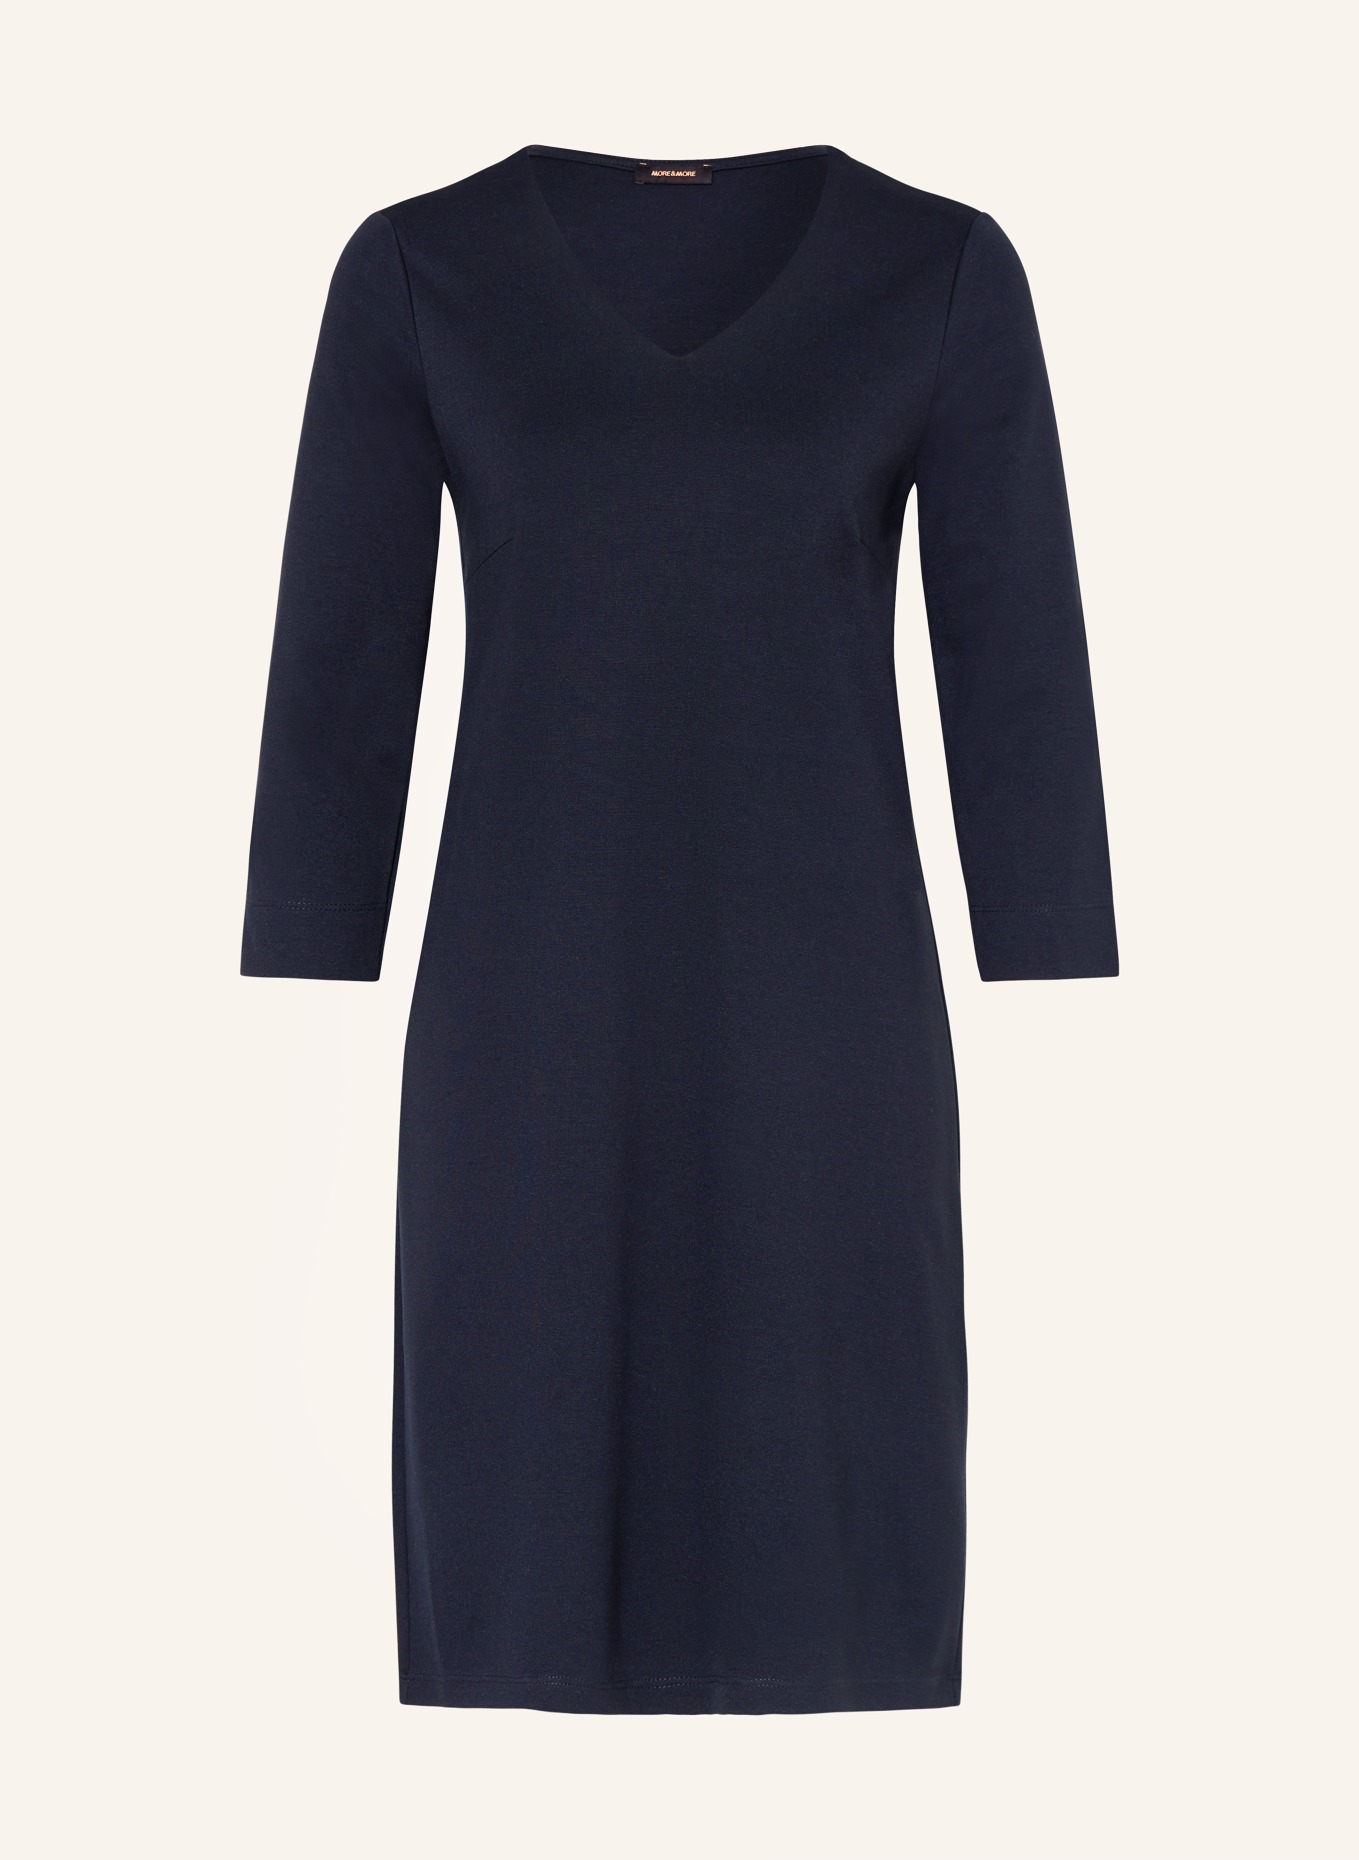 MORE & MORE Jersey dress with 3/4 sleeves, Color: DARK BLUE (Image 1)